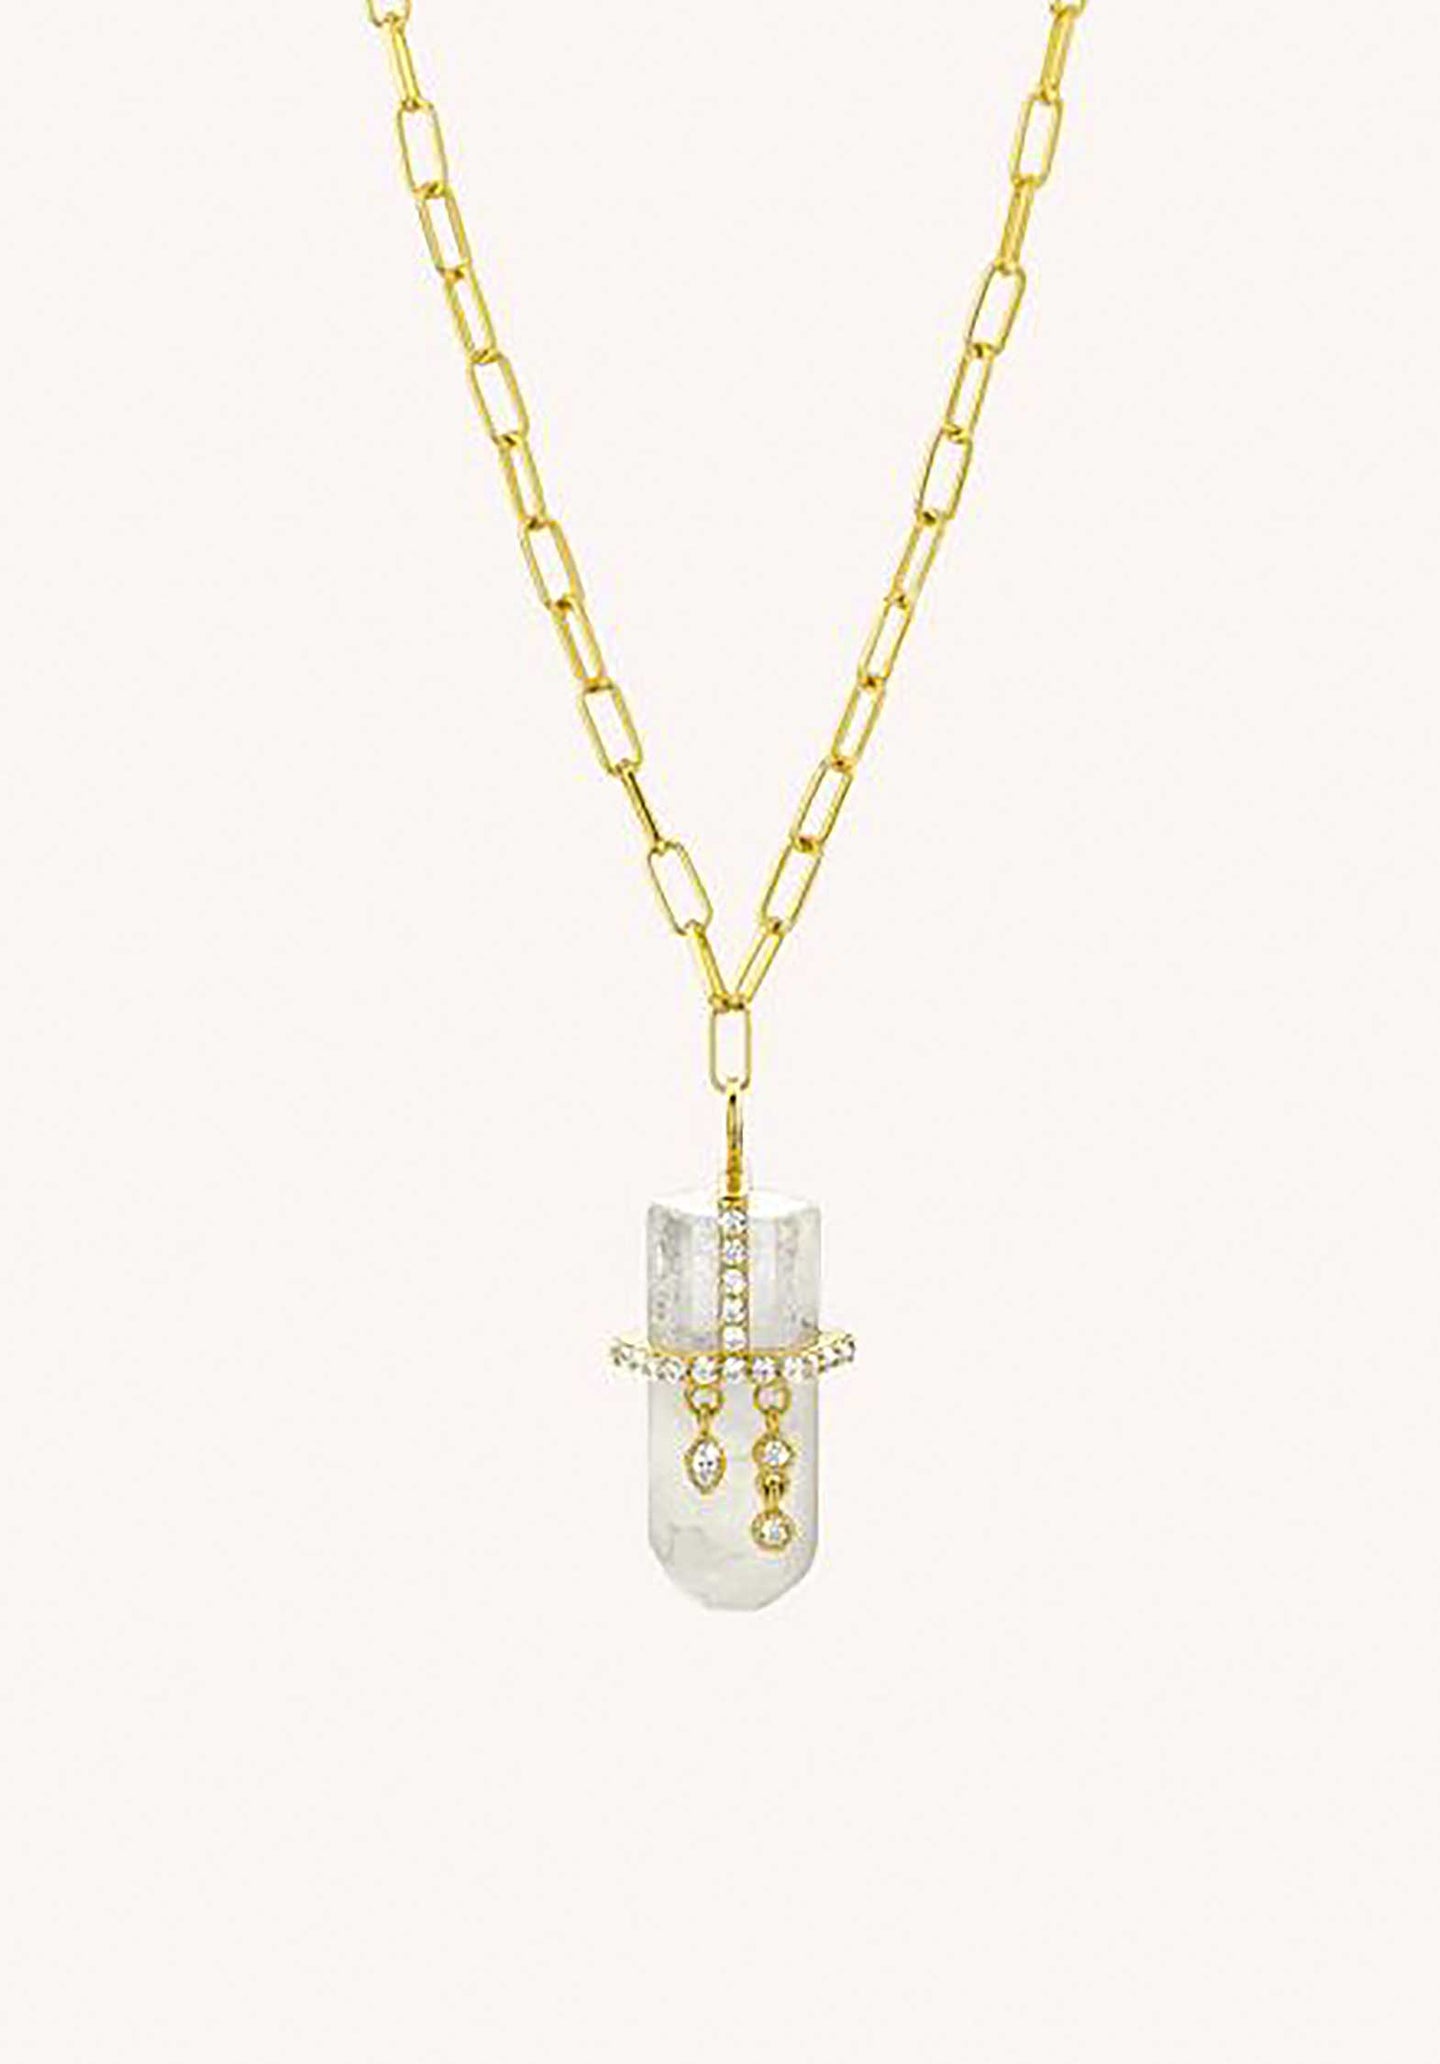 Necklace Co-139g Metal